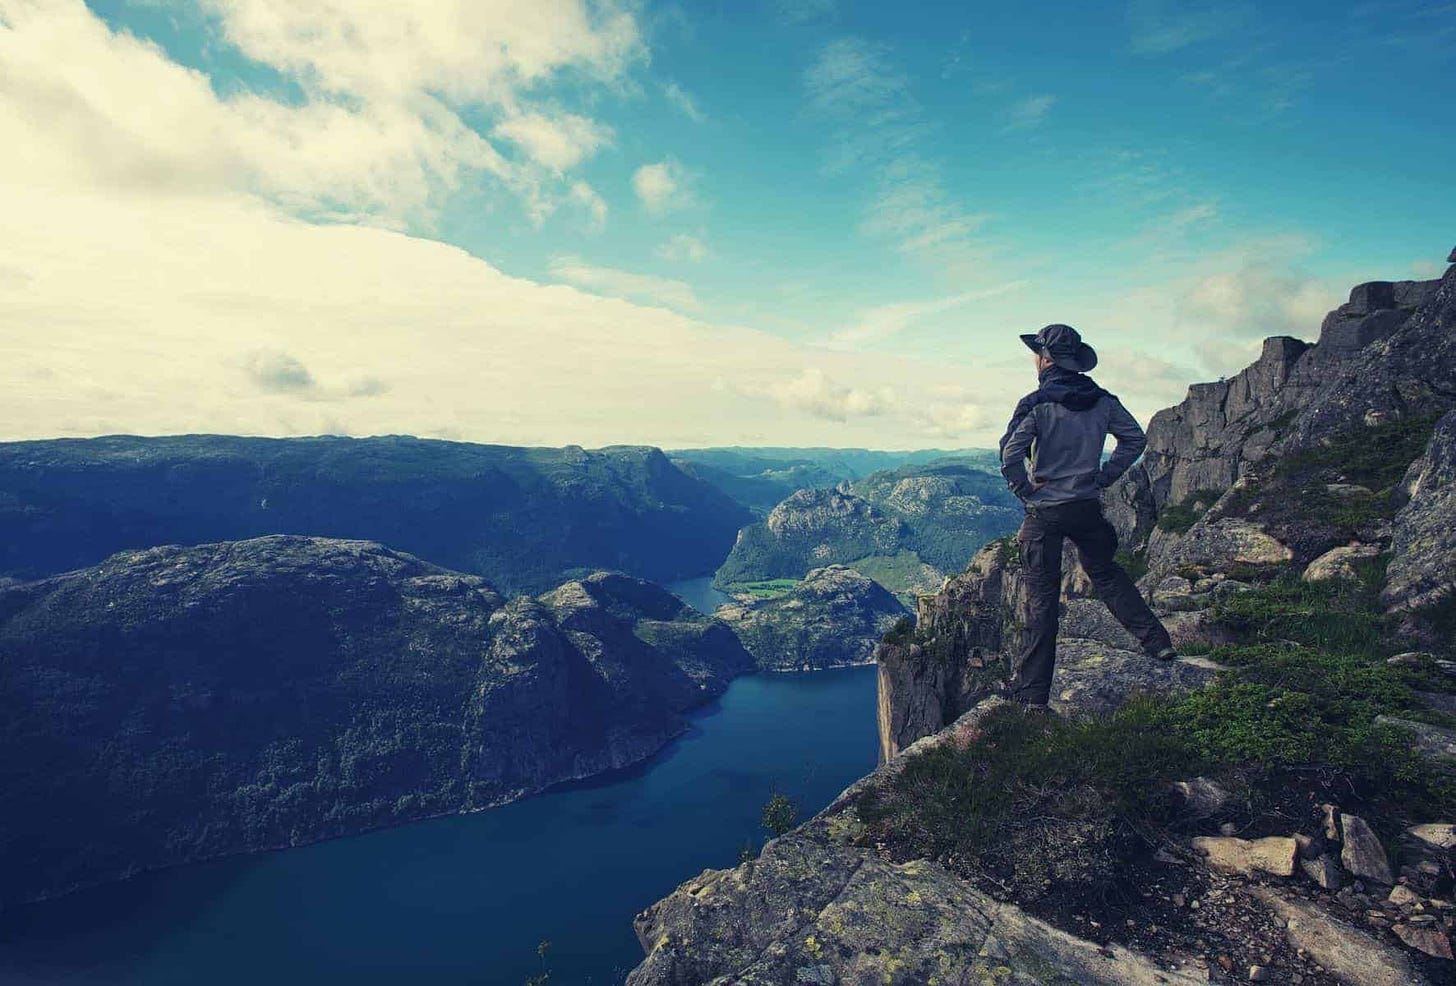 71 Inspirational Hiking Quotes to Get You Motivated - My Open Country